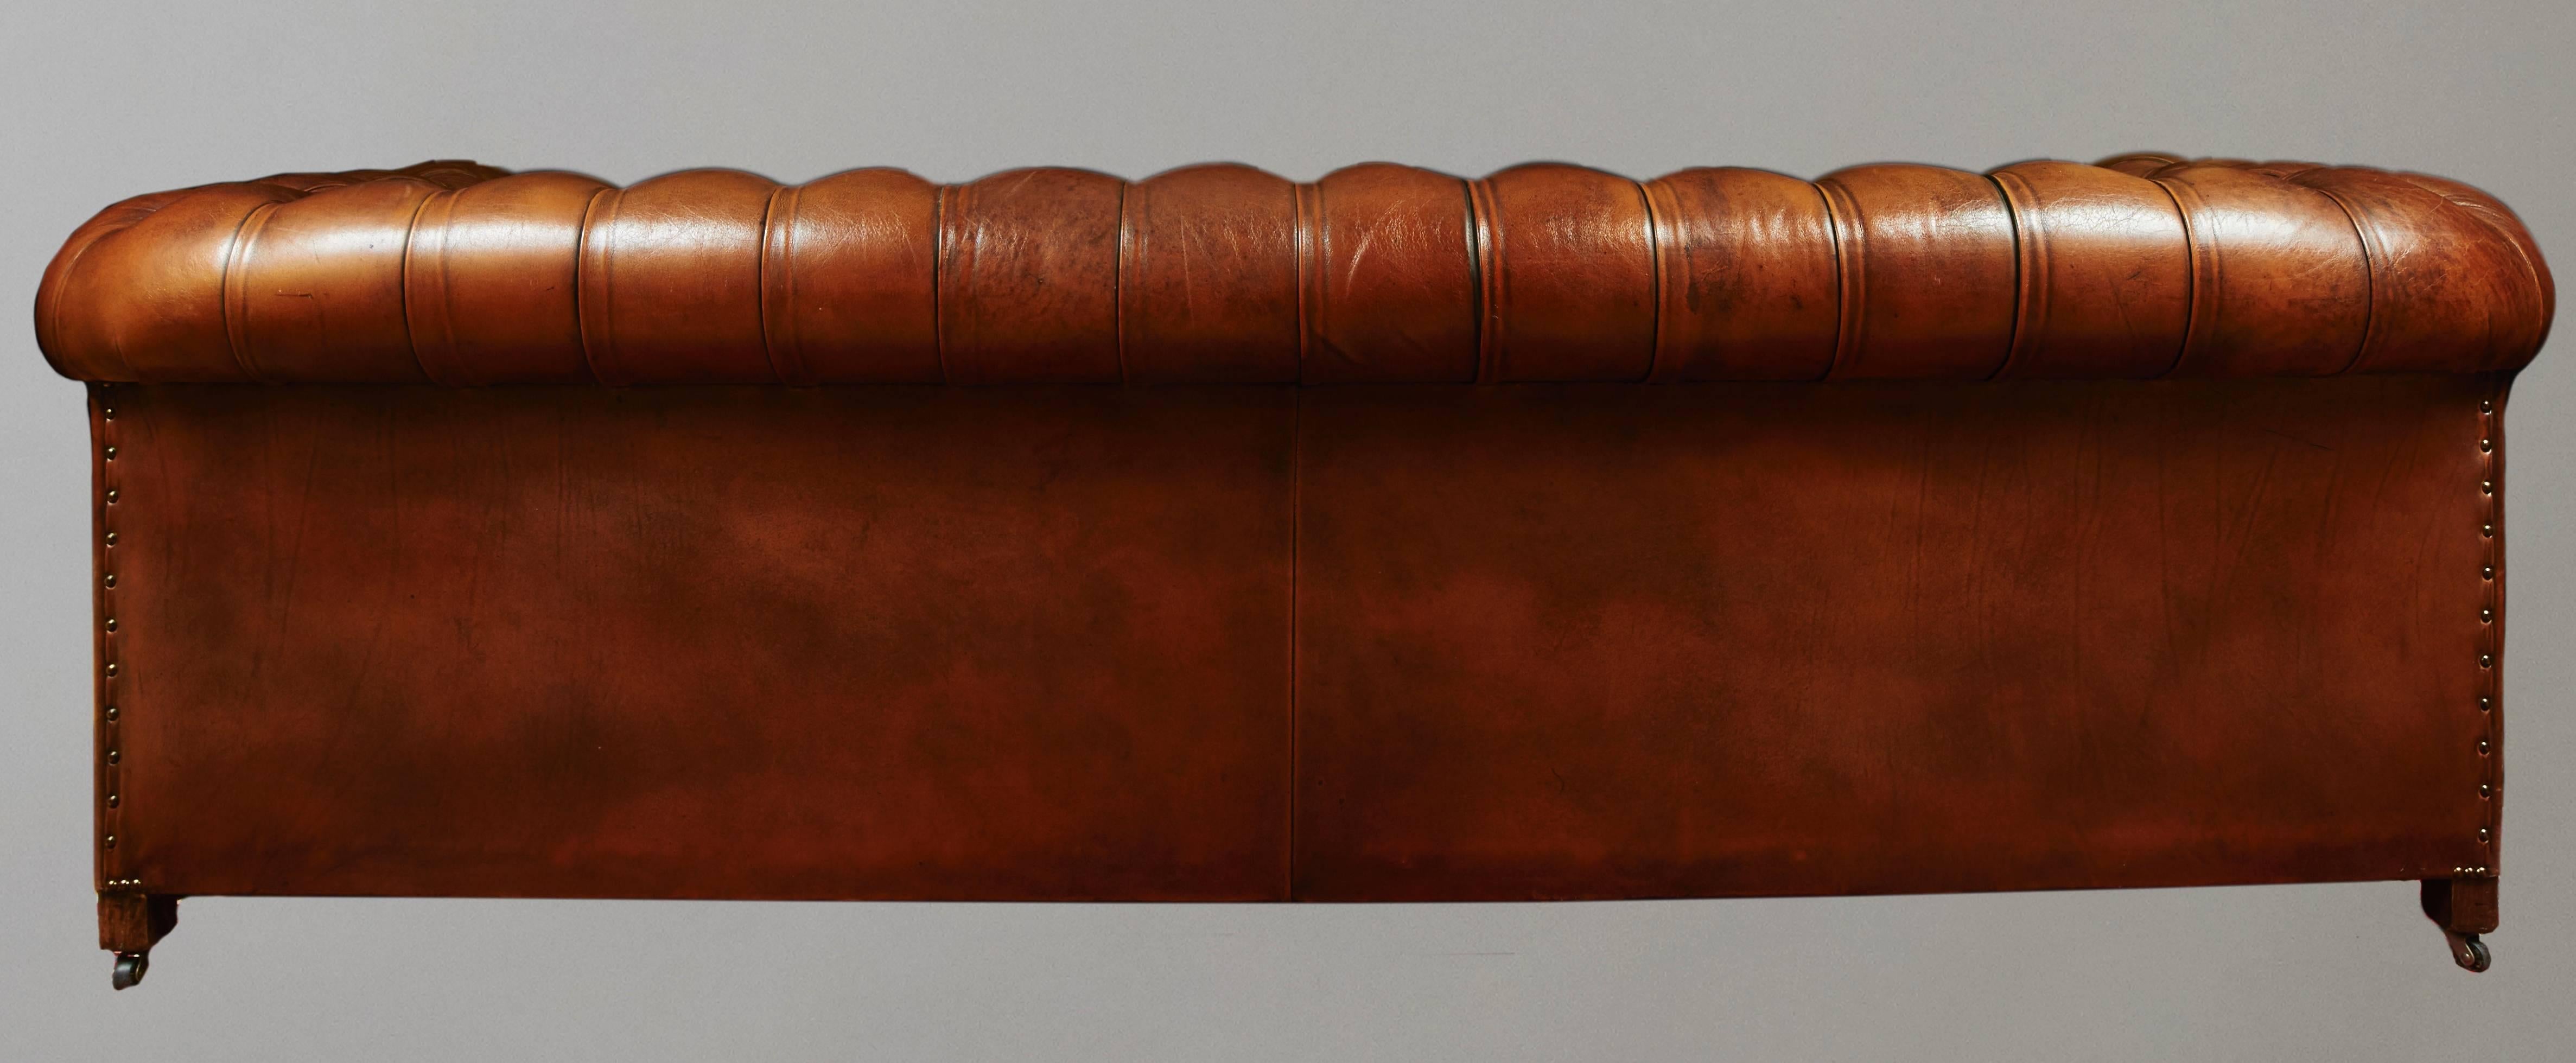 A good quality English or American tufted leather sofa upholstered in chestnut colored hide in traditional style with nailhead trim and rolled arms, resting on bun feet, 20th century.